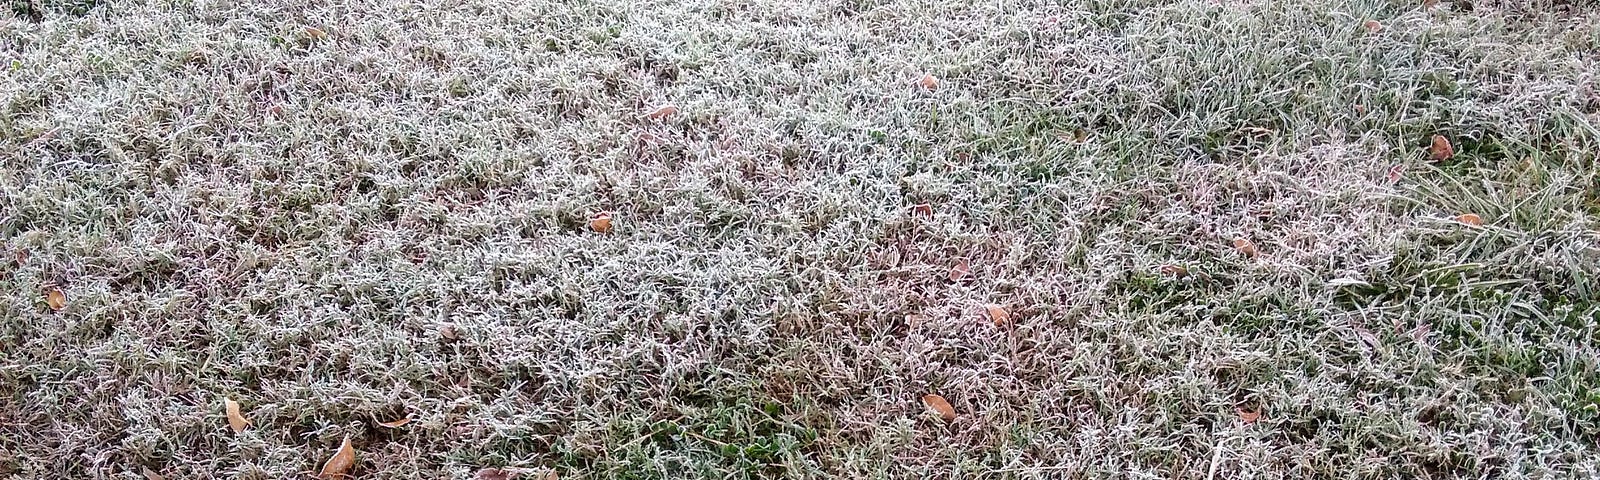 Grass frosted white.